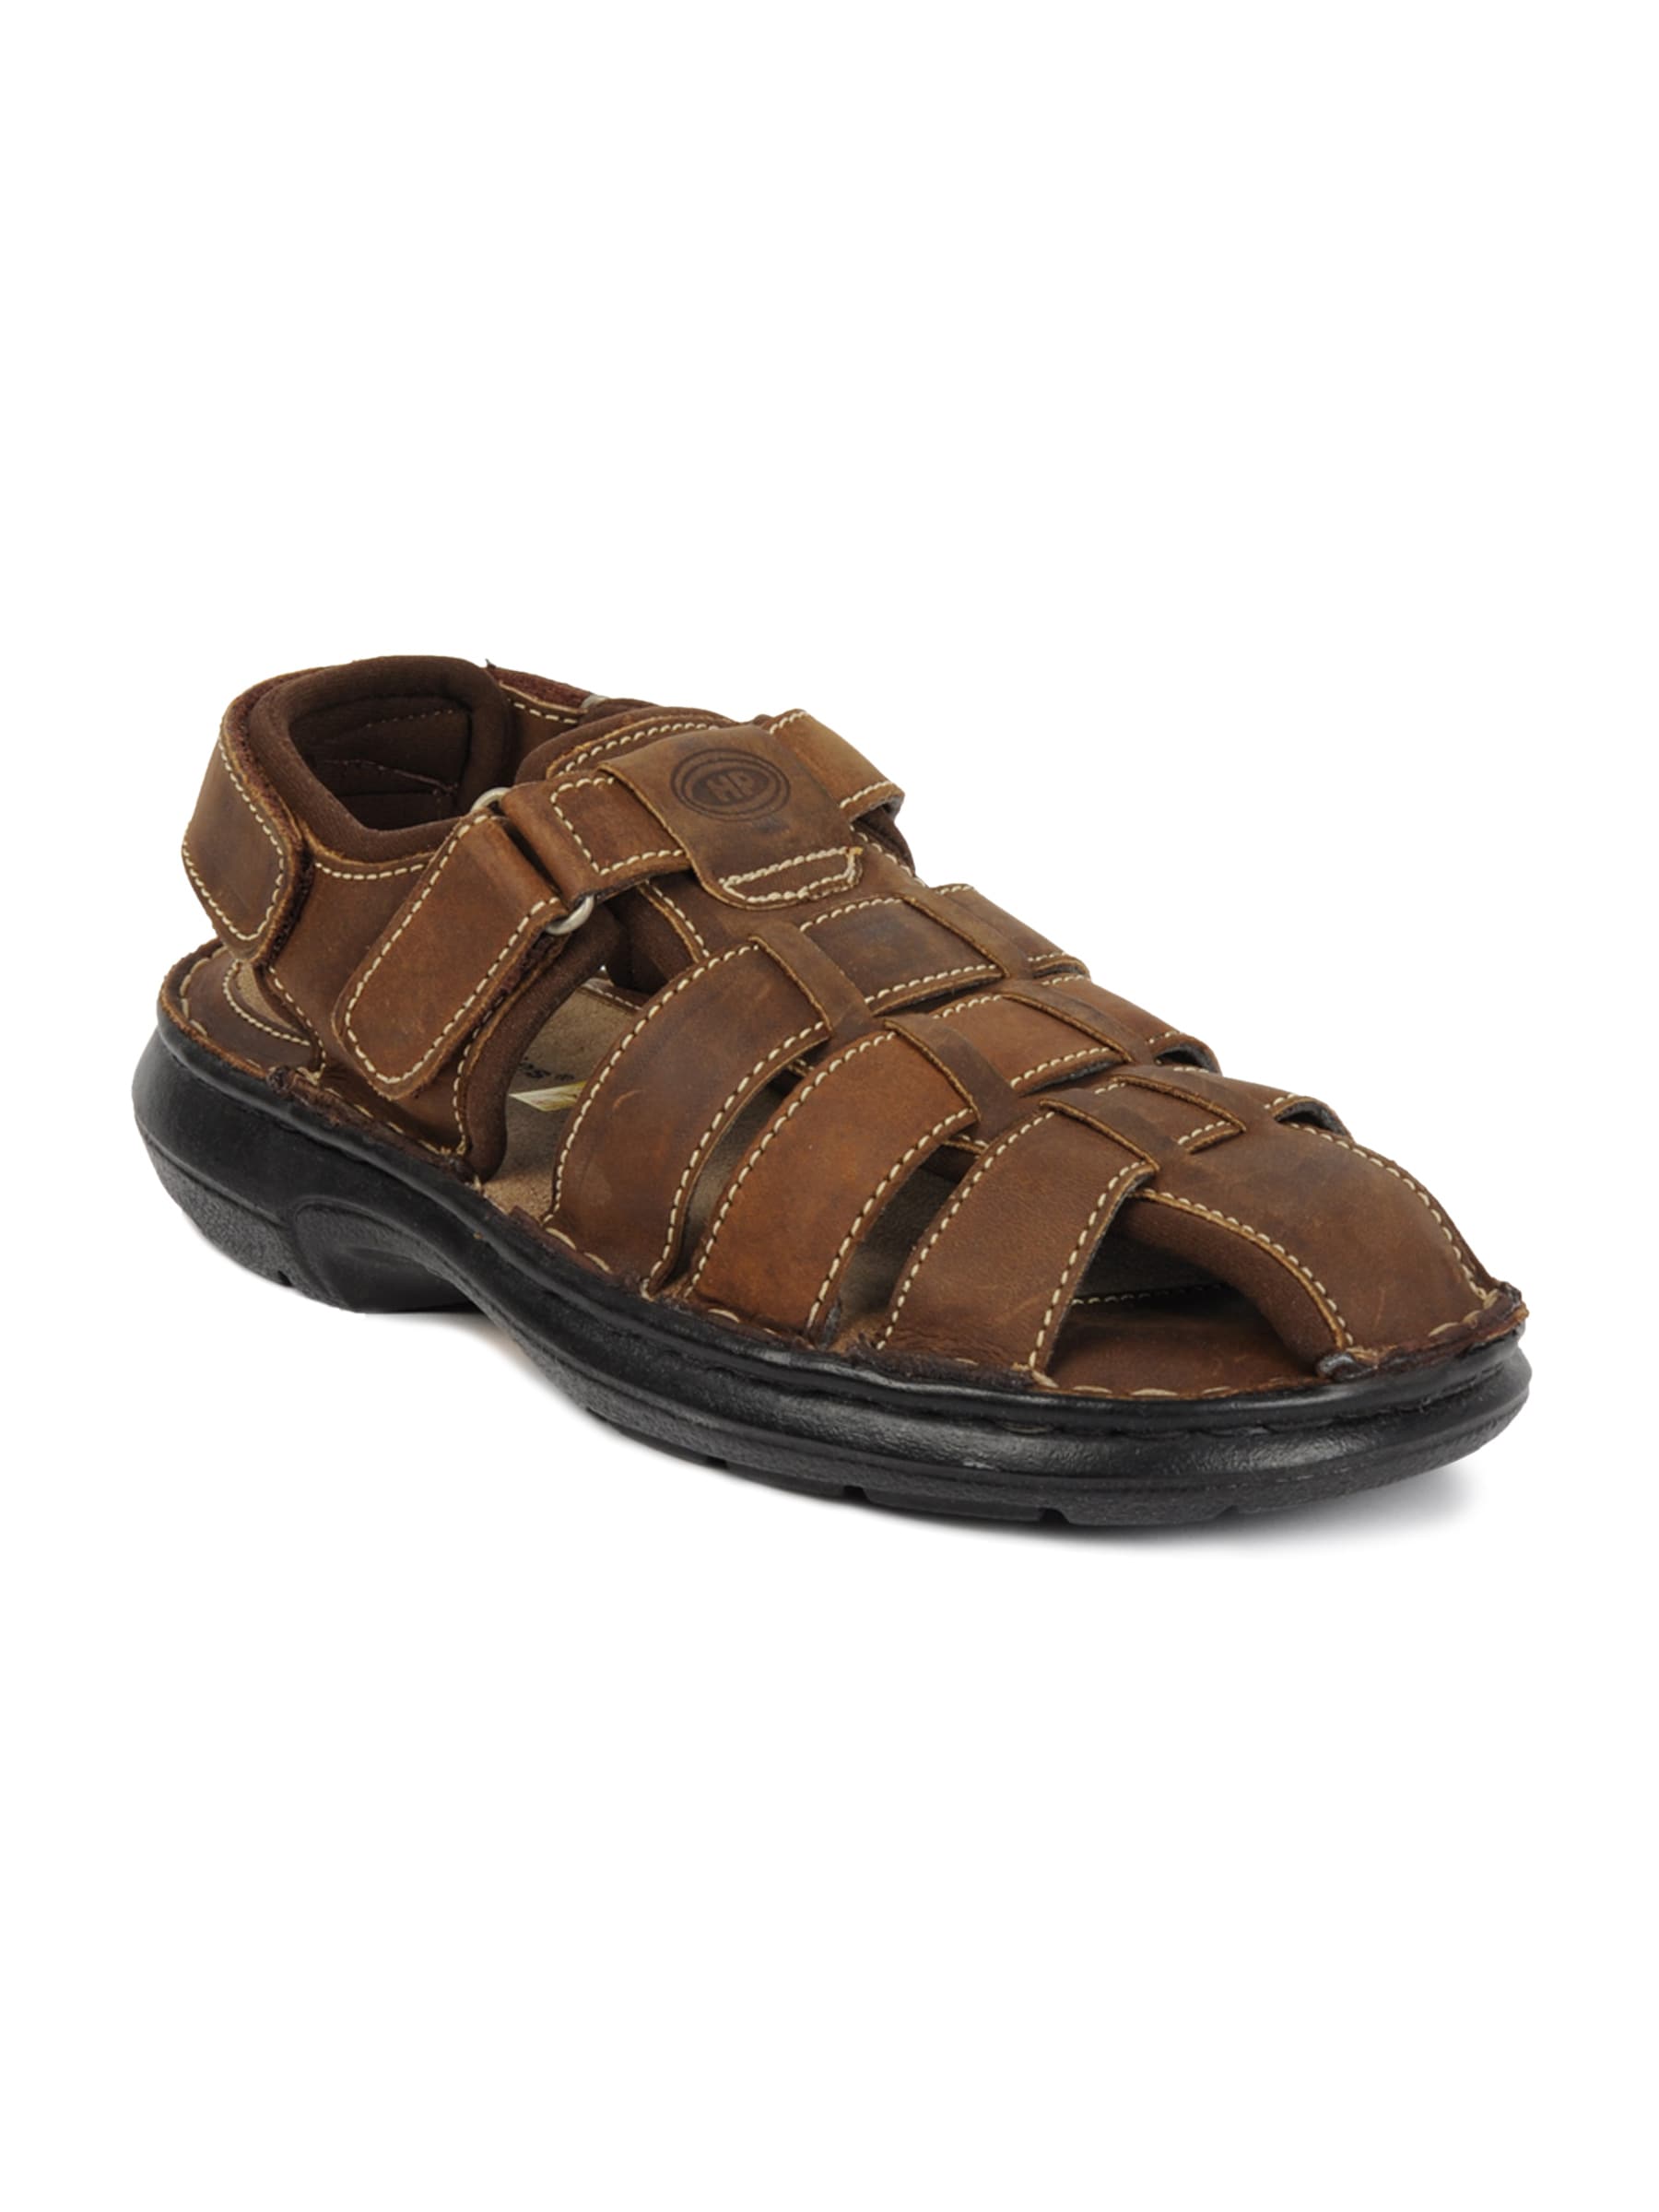 Hush Puppies Unisex Slip on Brown Floaters